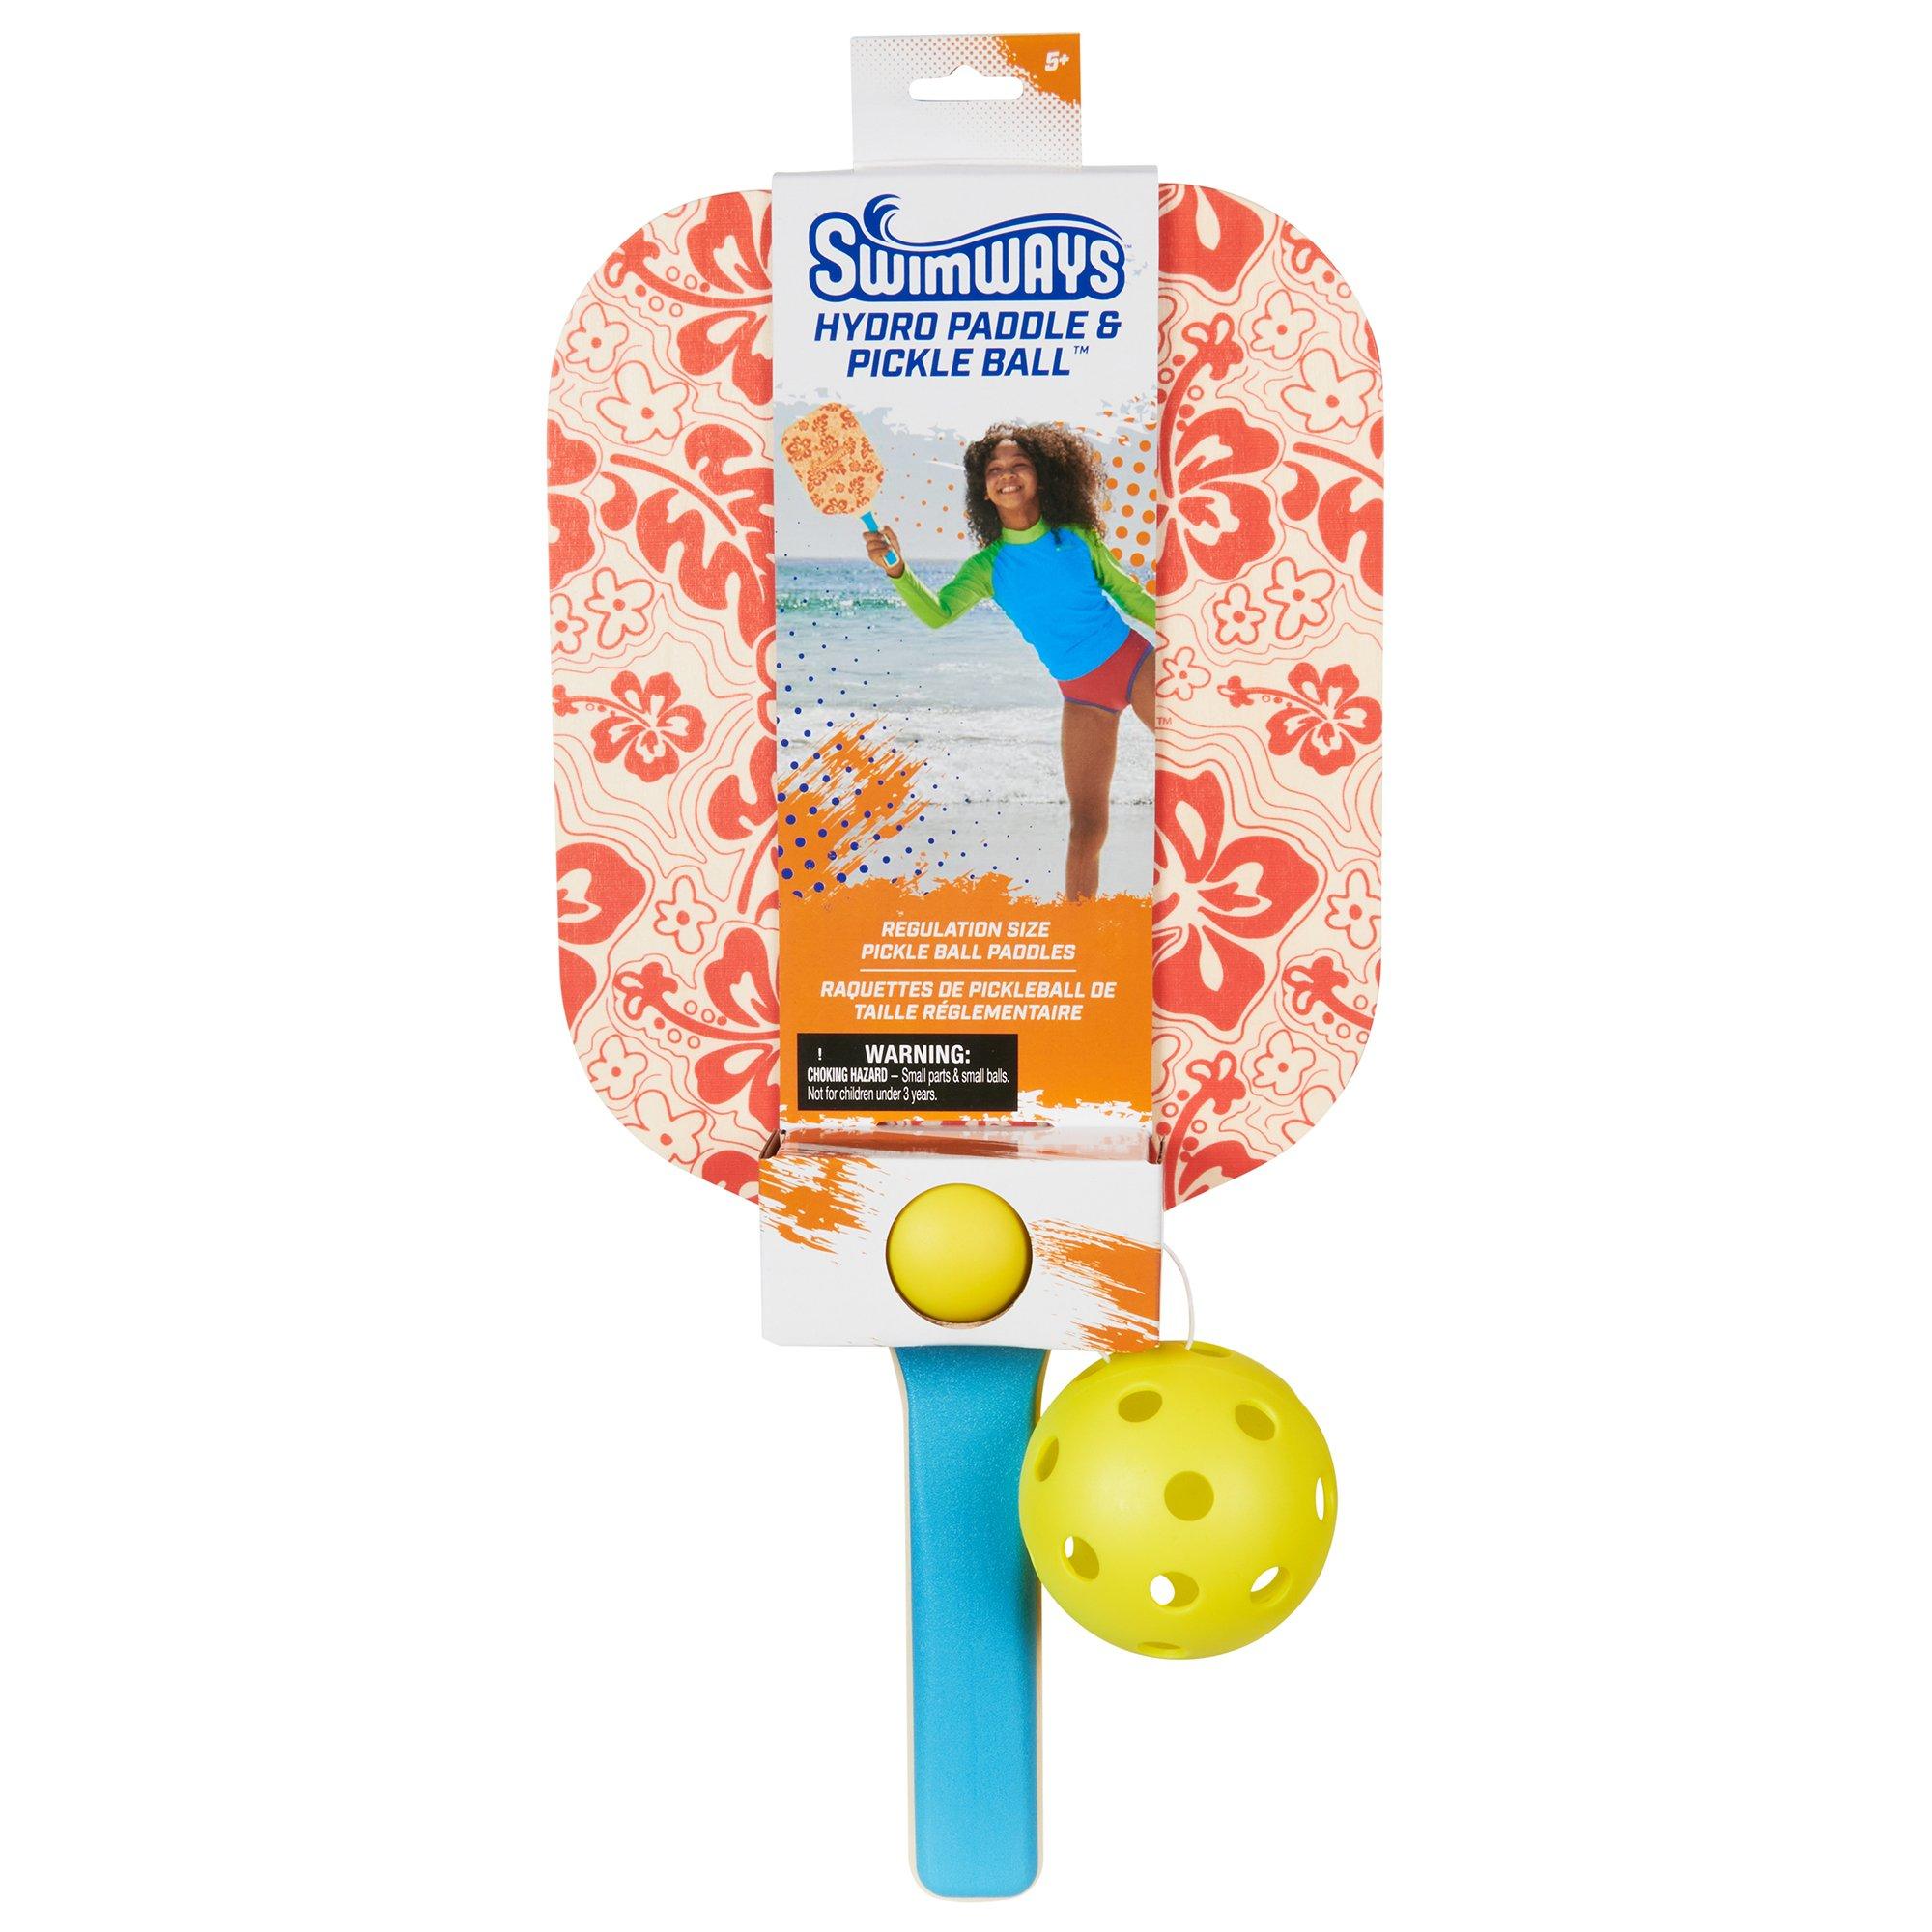 Hydro Paddle and Pickleball Set